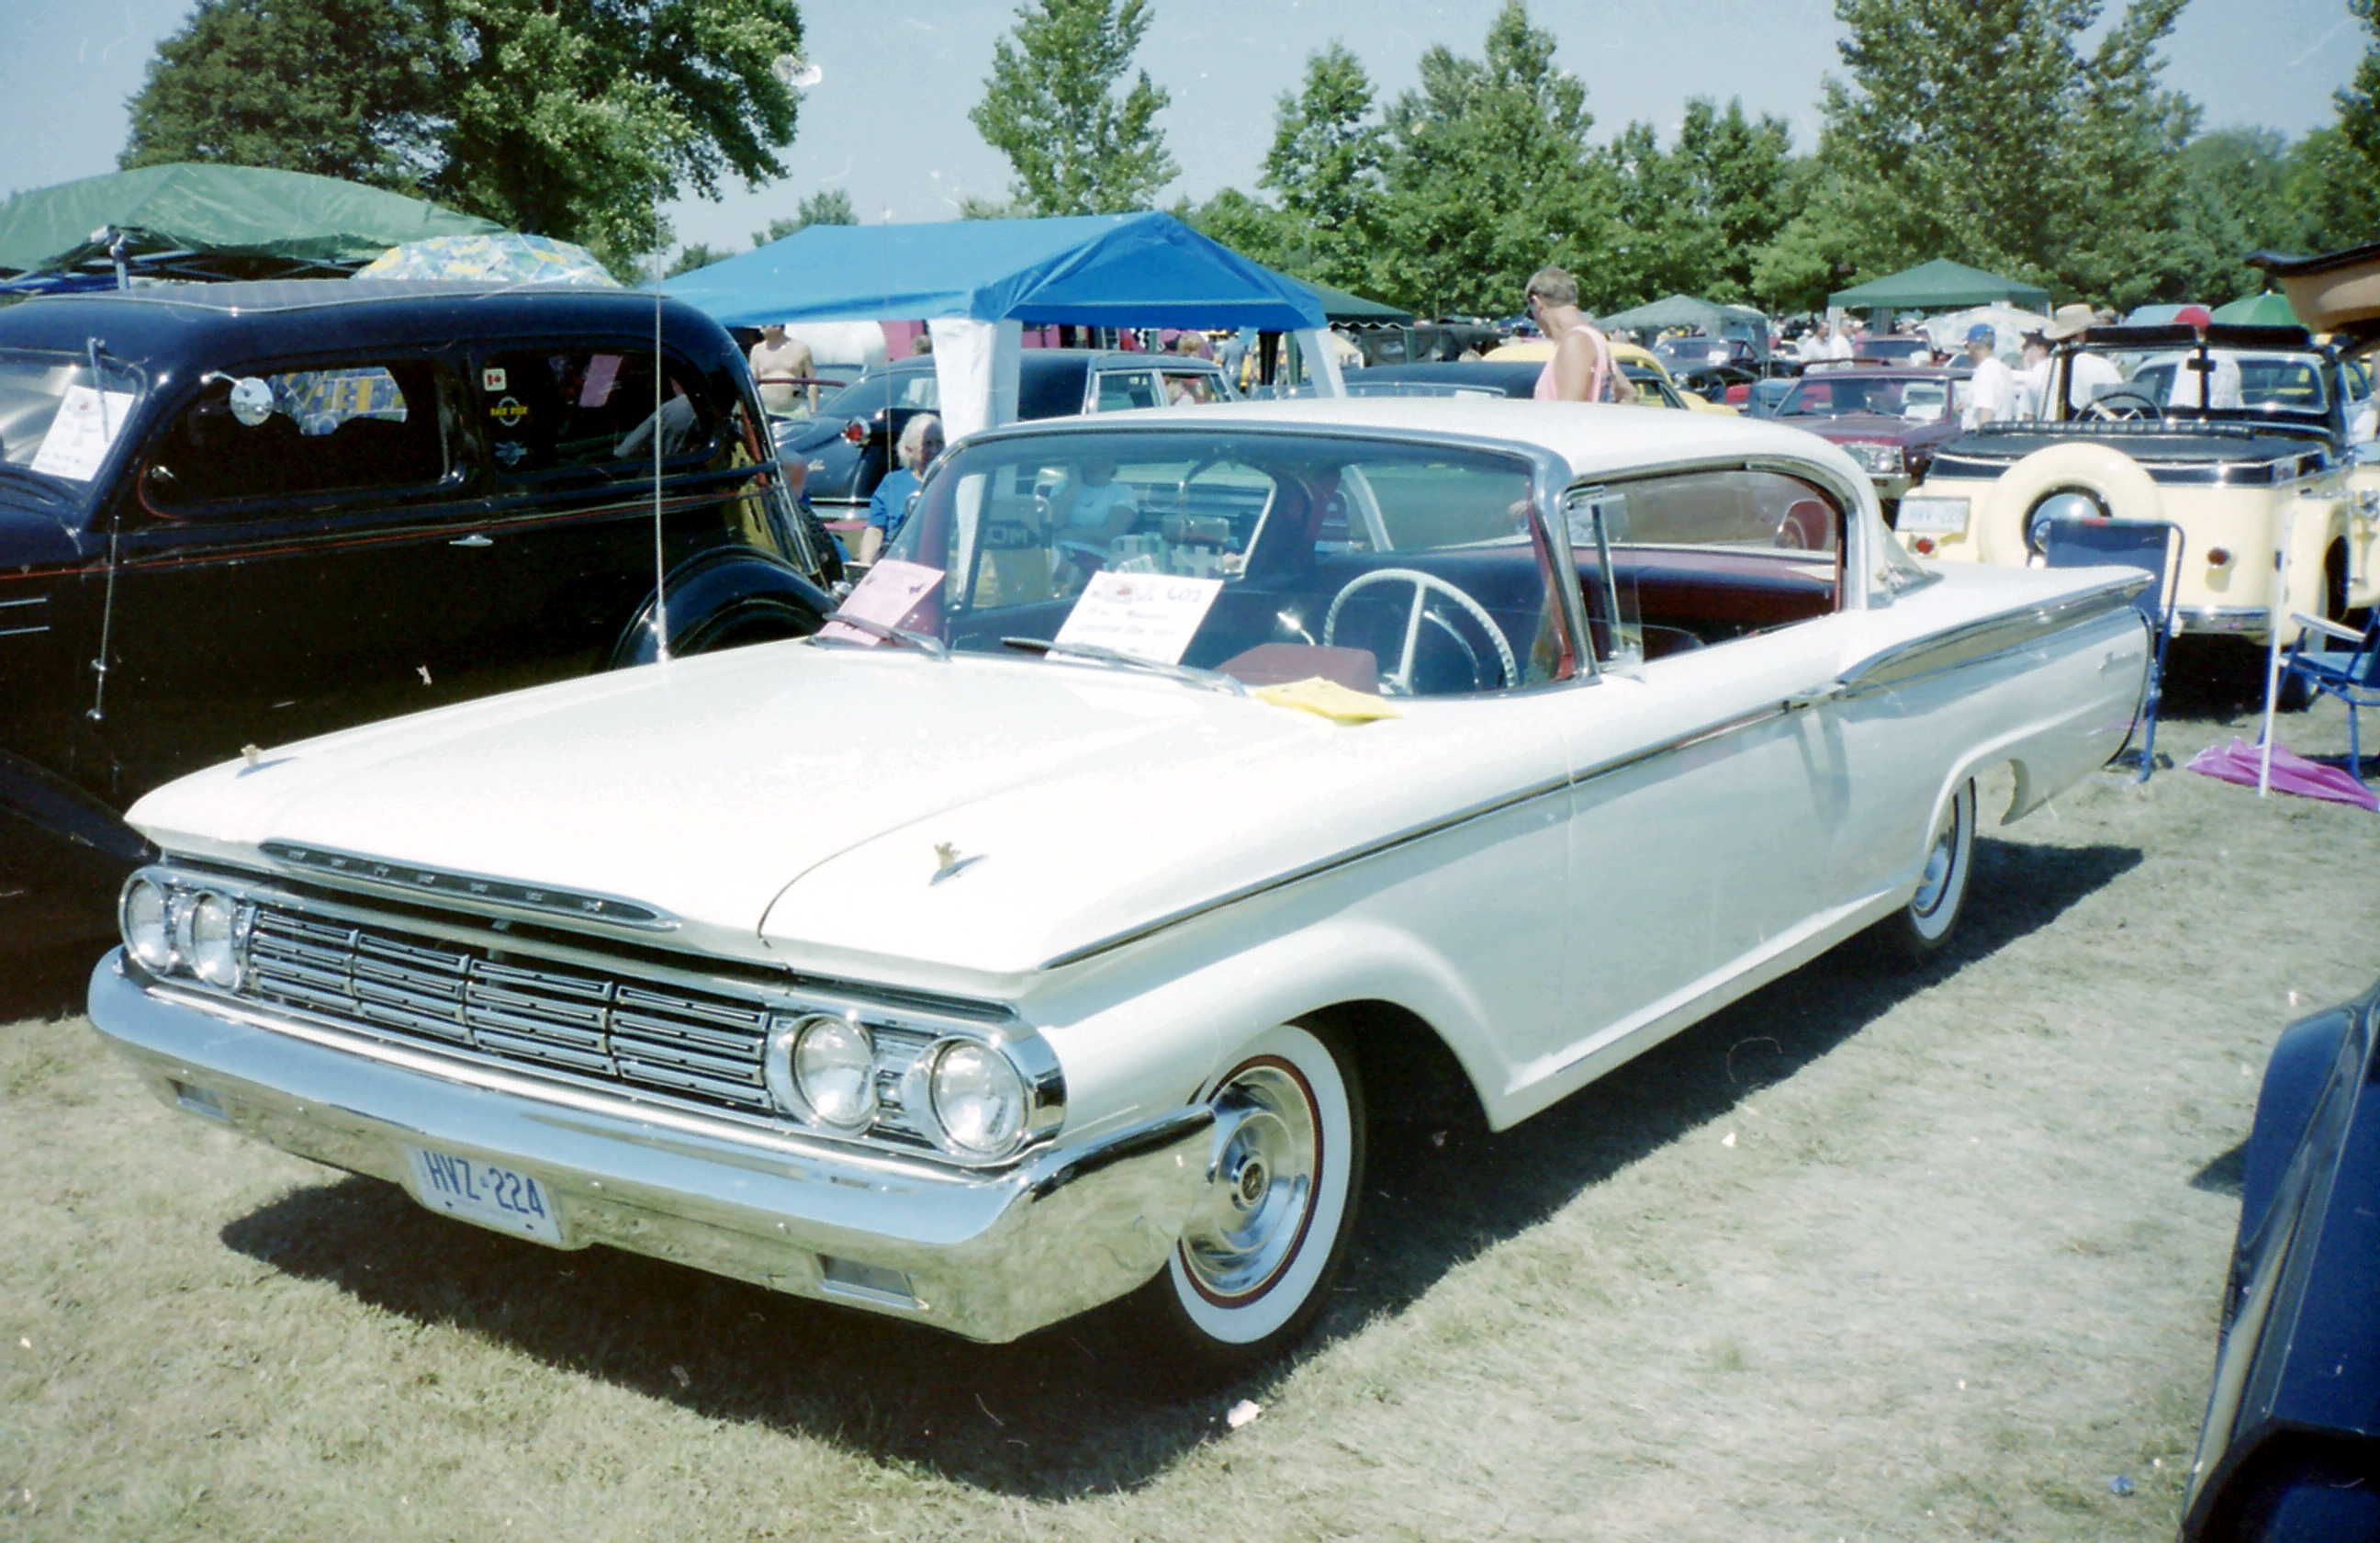 1960 Canadian Ford Monarch Richelieu,london Ont Canada. | Flickr ...